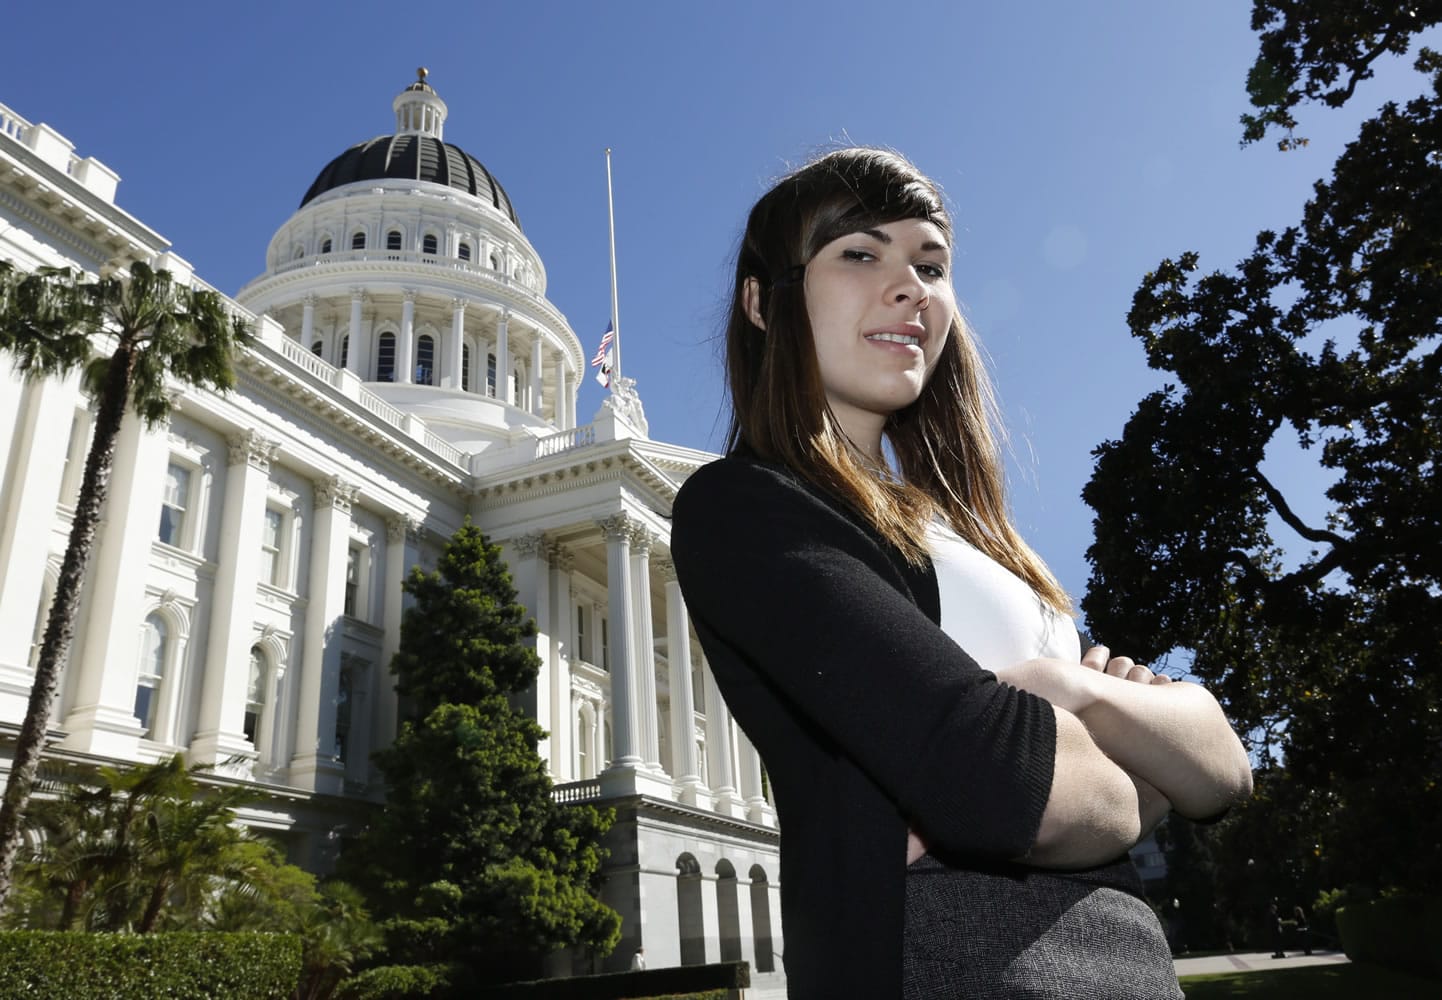 Eli Erlick, 17, stands outside the Capitol building in Sacramento, Calif. on April 17 after testifying before an education committee. Erlick is the director of an organization called Trans Student Equality Resources, which provides schools with training and information about students like her. Among other things, the group explains gender differences and how students transition, including name and pronoun changes.